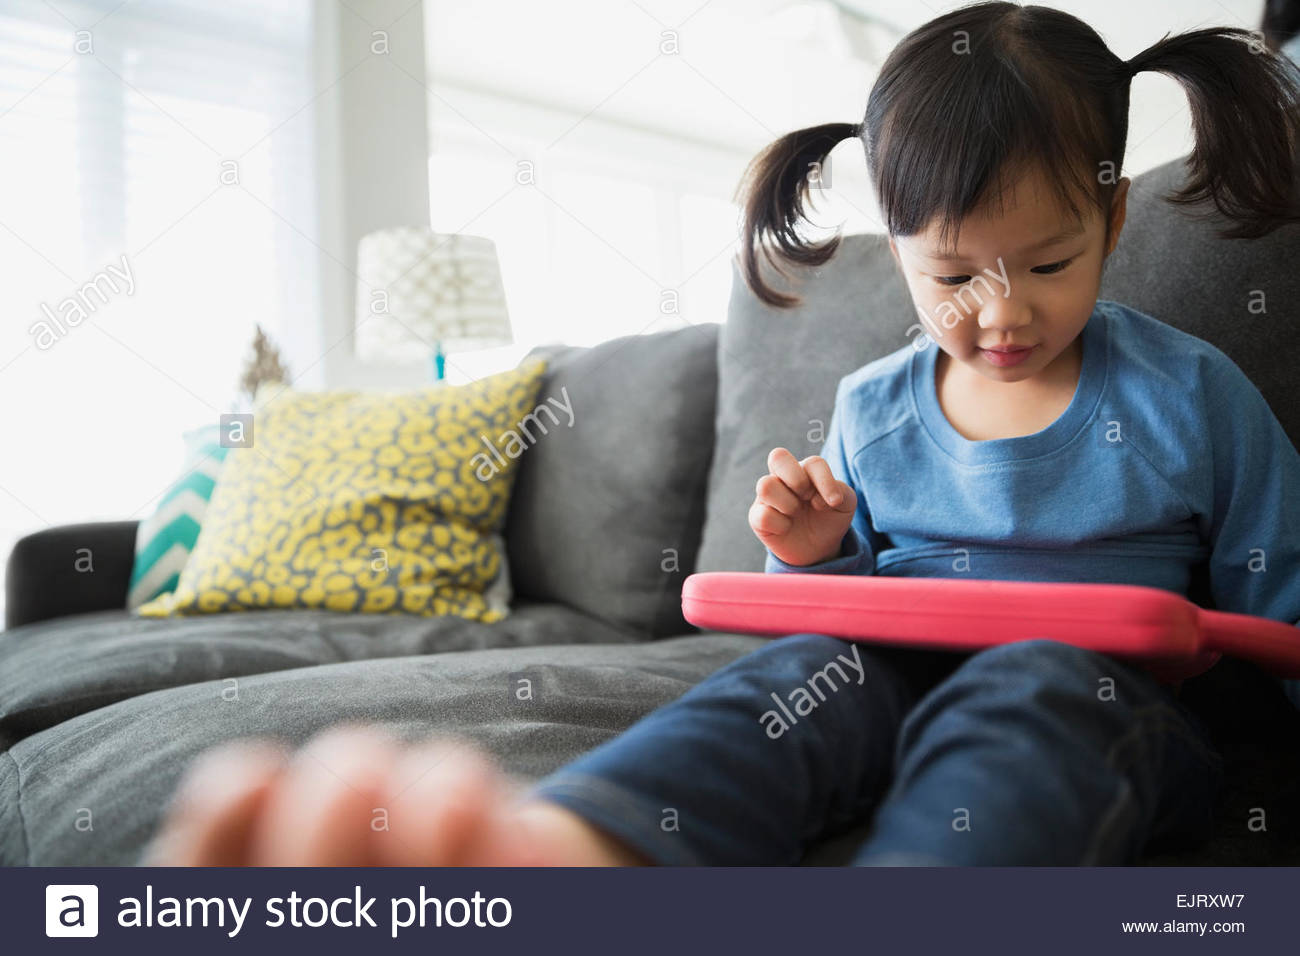 Girl with pigtails using digital tablet on sofa Stock Photo